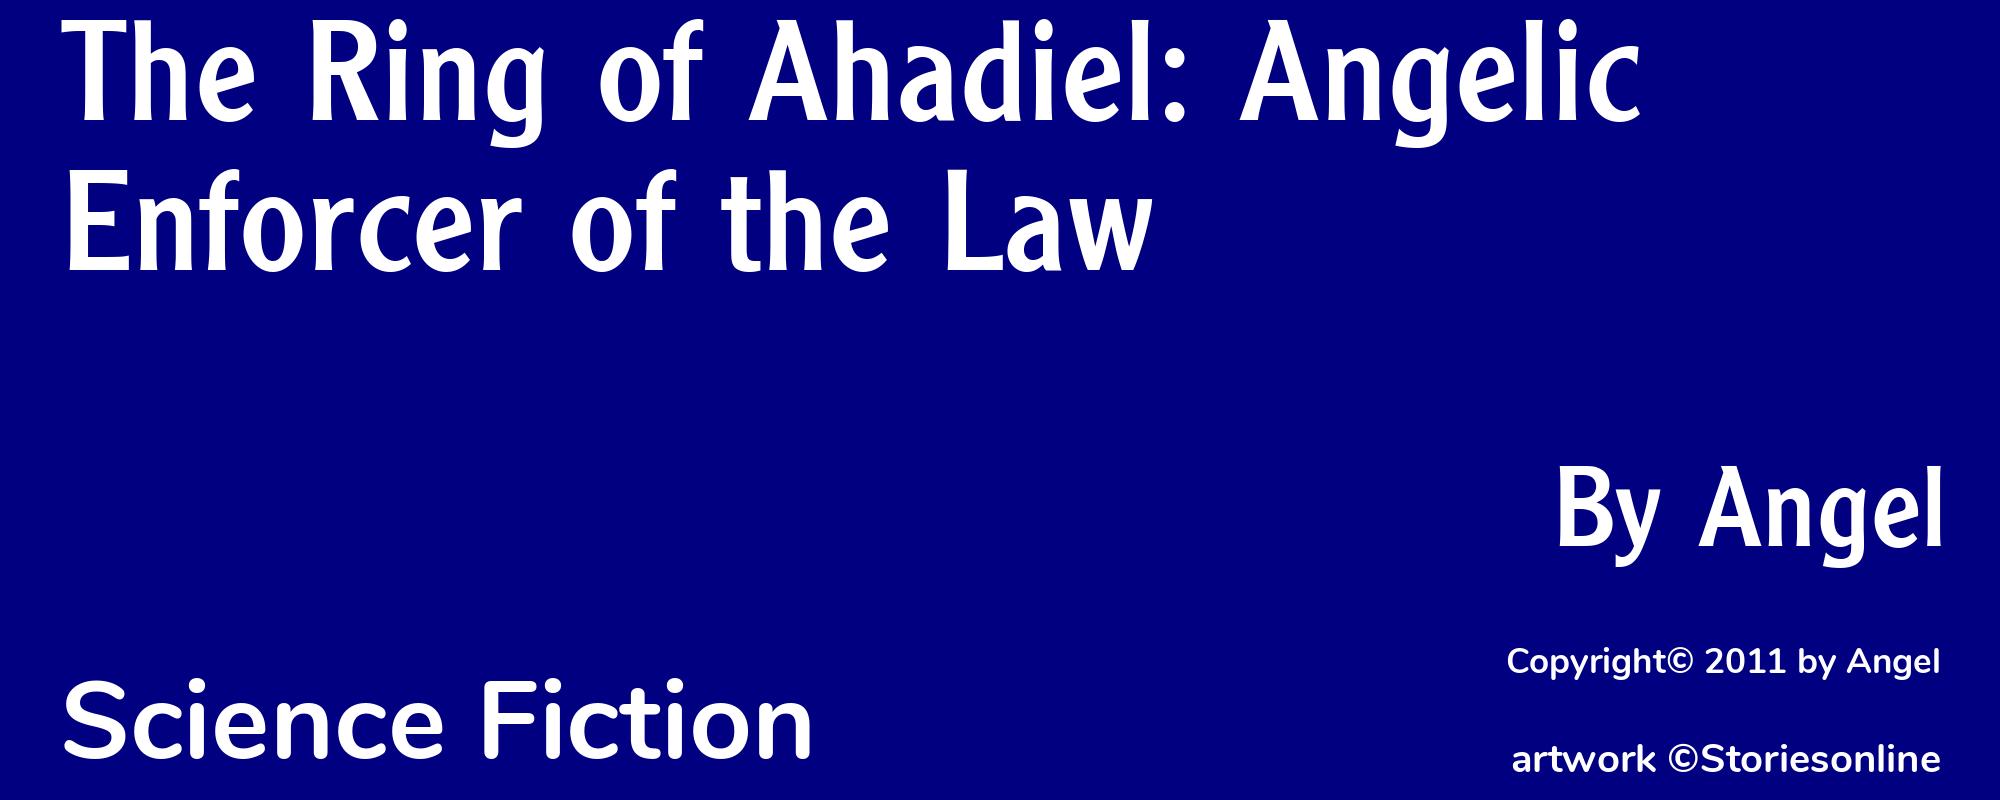 The Ring of Ahadiel: Angelic Enforcer of the Law - Cover